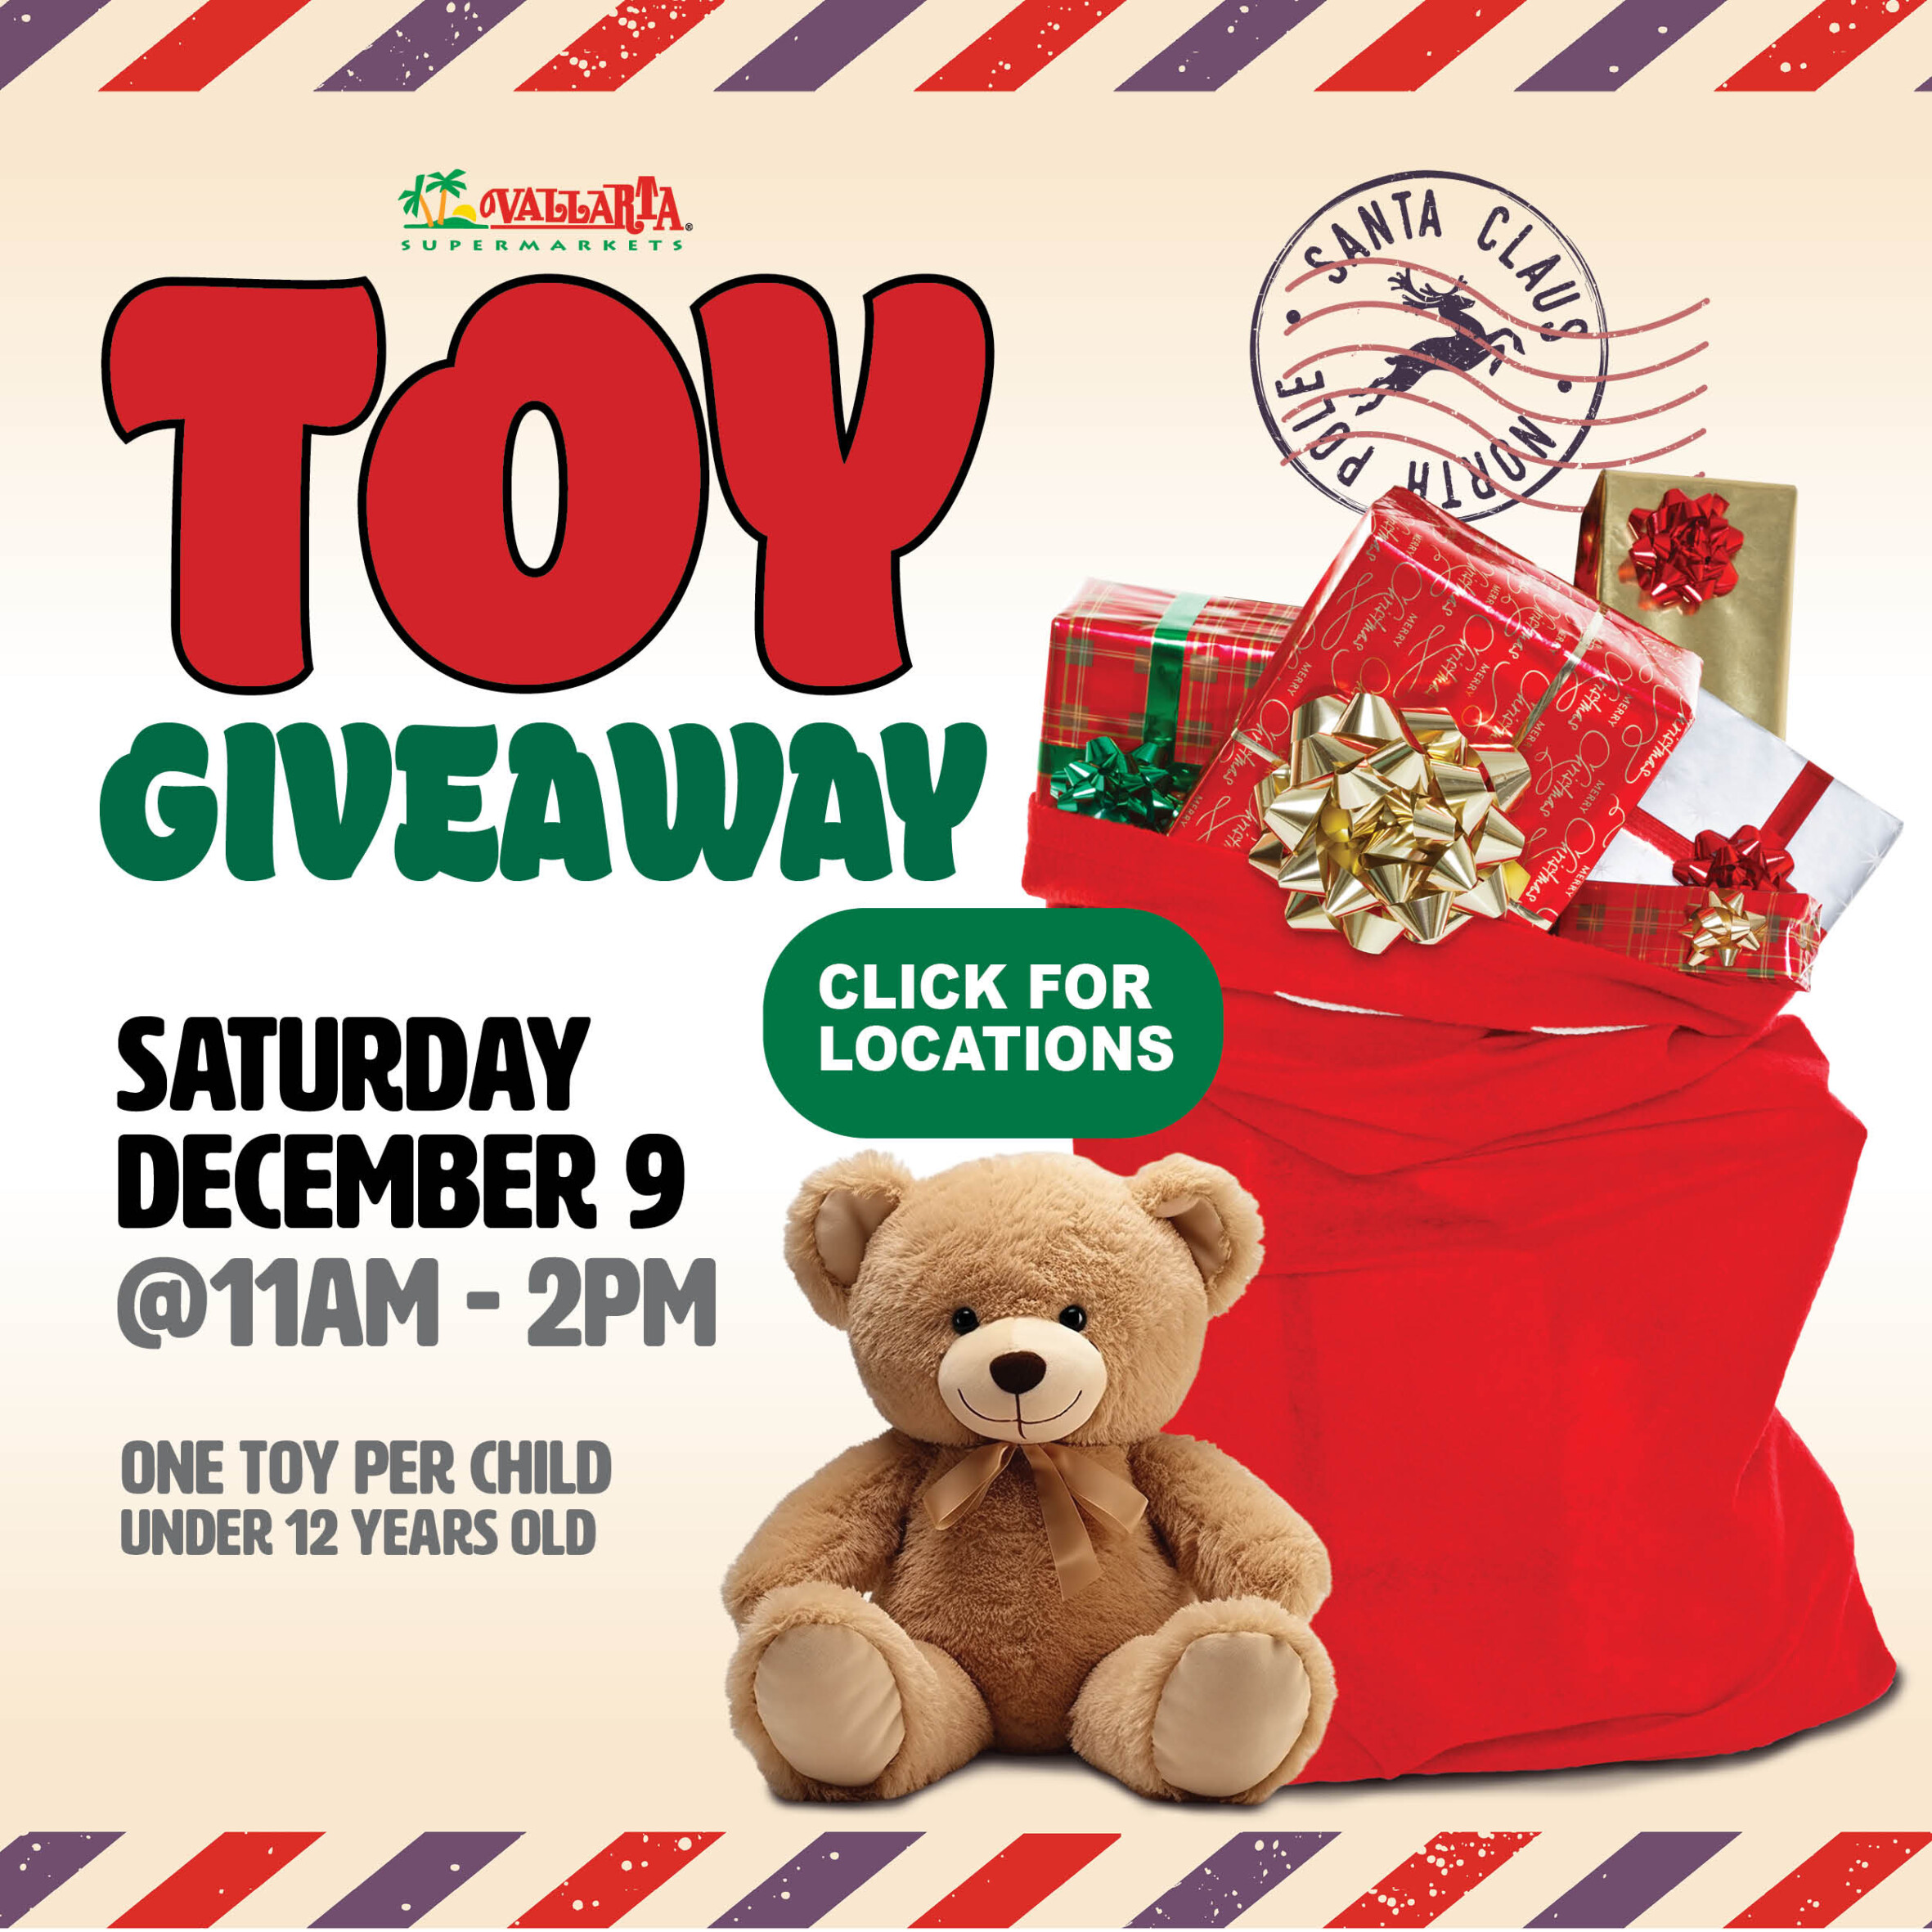 Toy samples giveaway